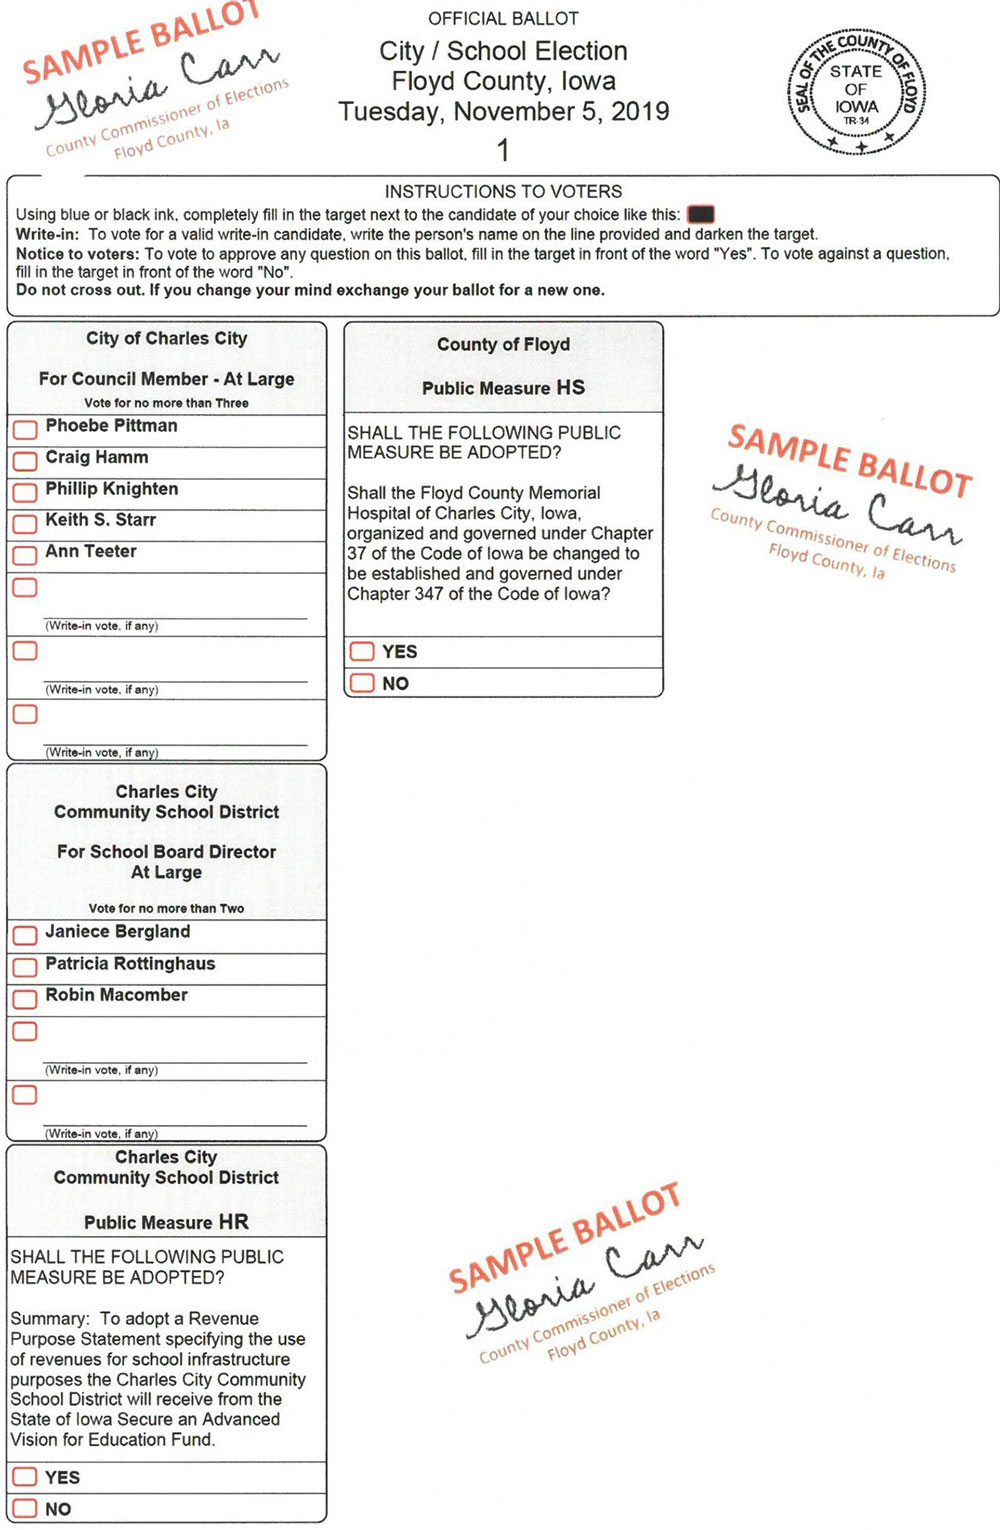 Absentee voting open now for city/school general election